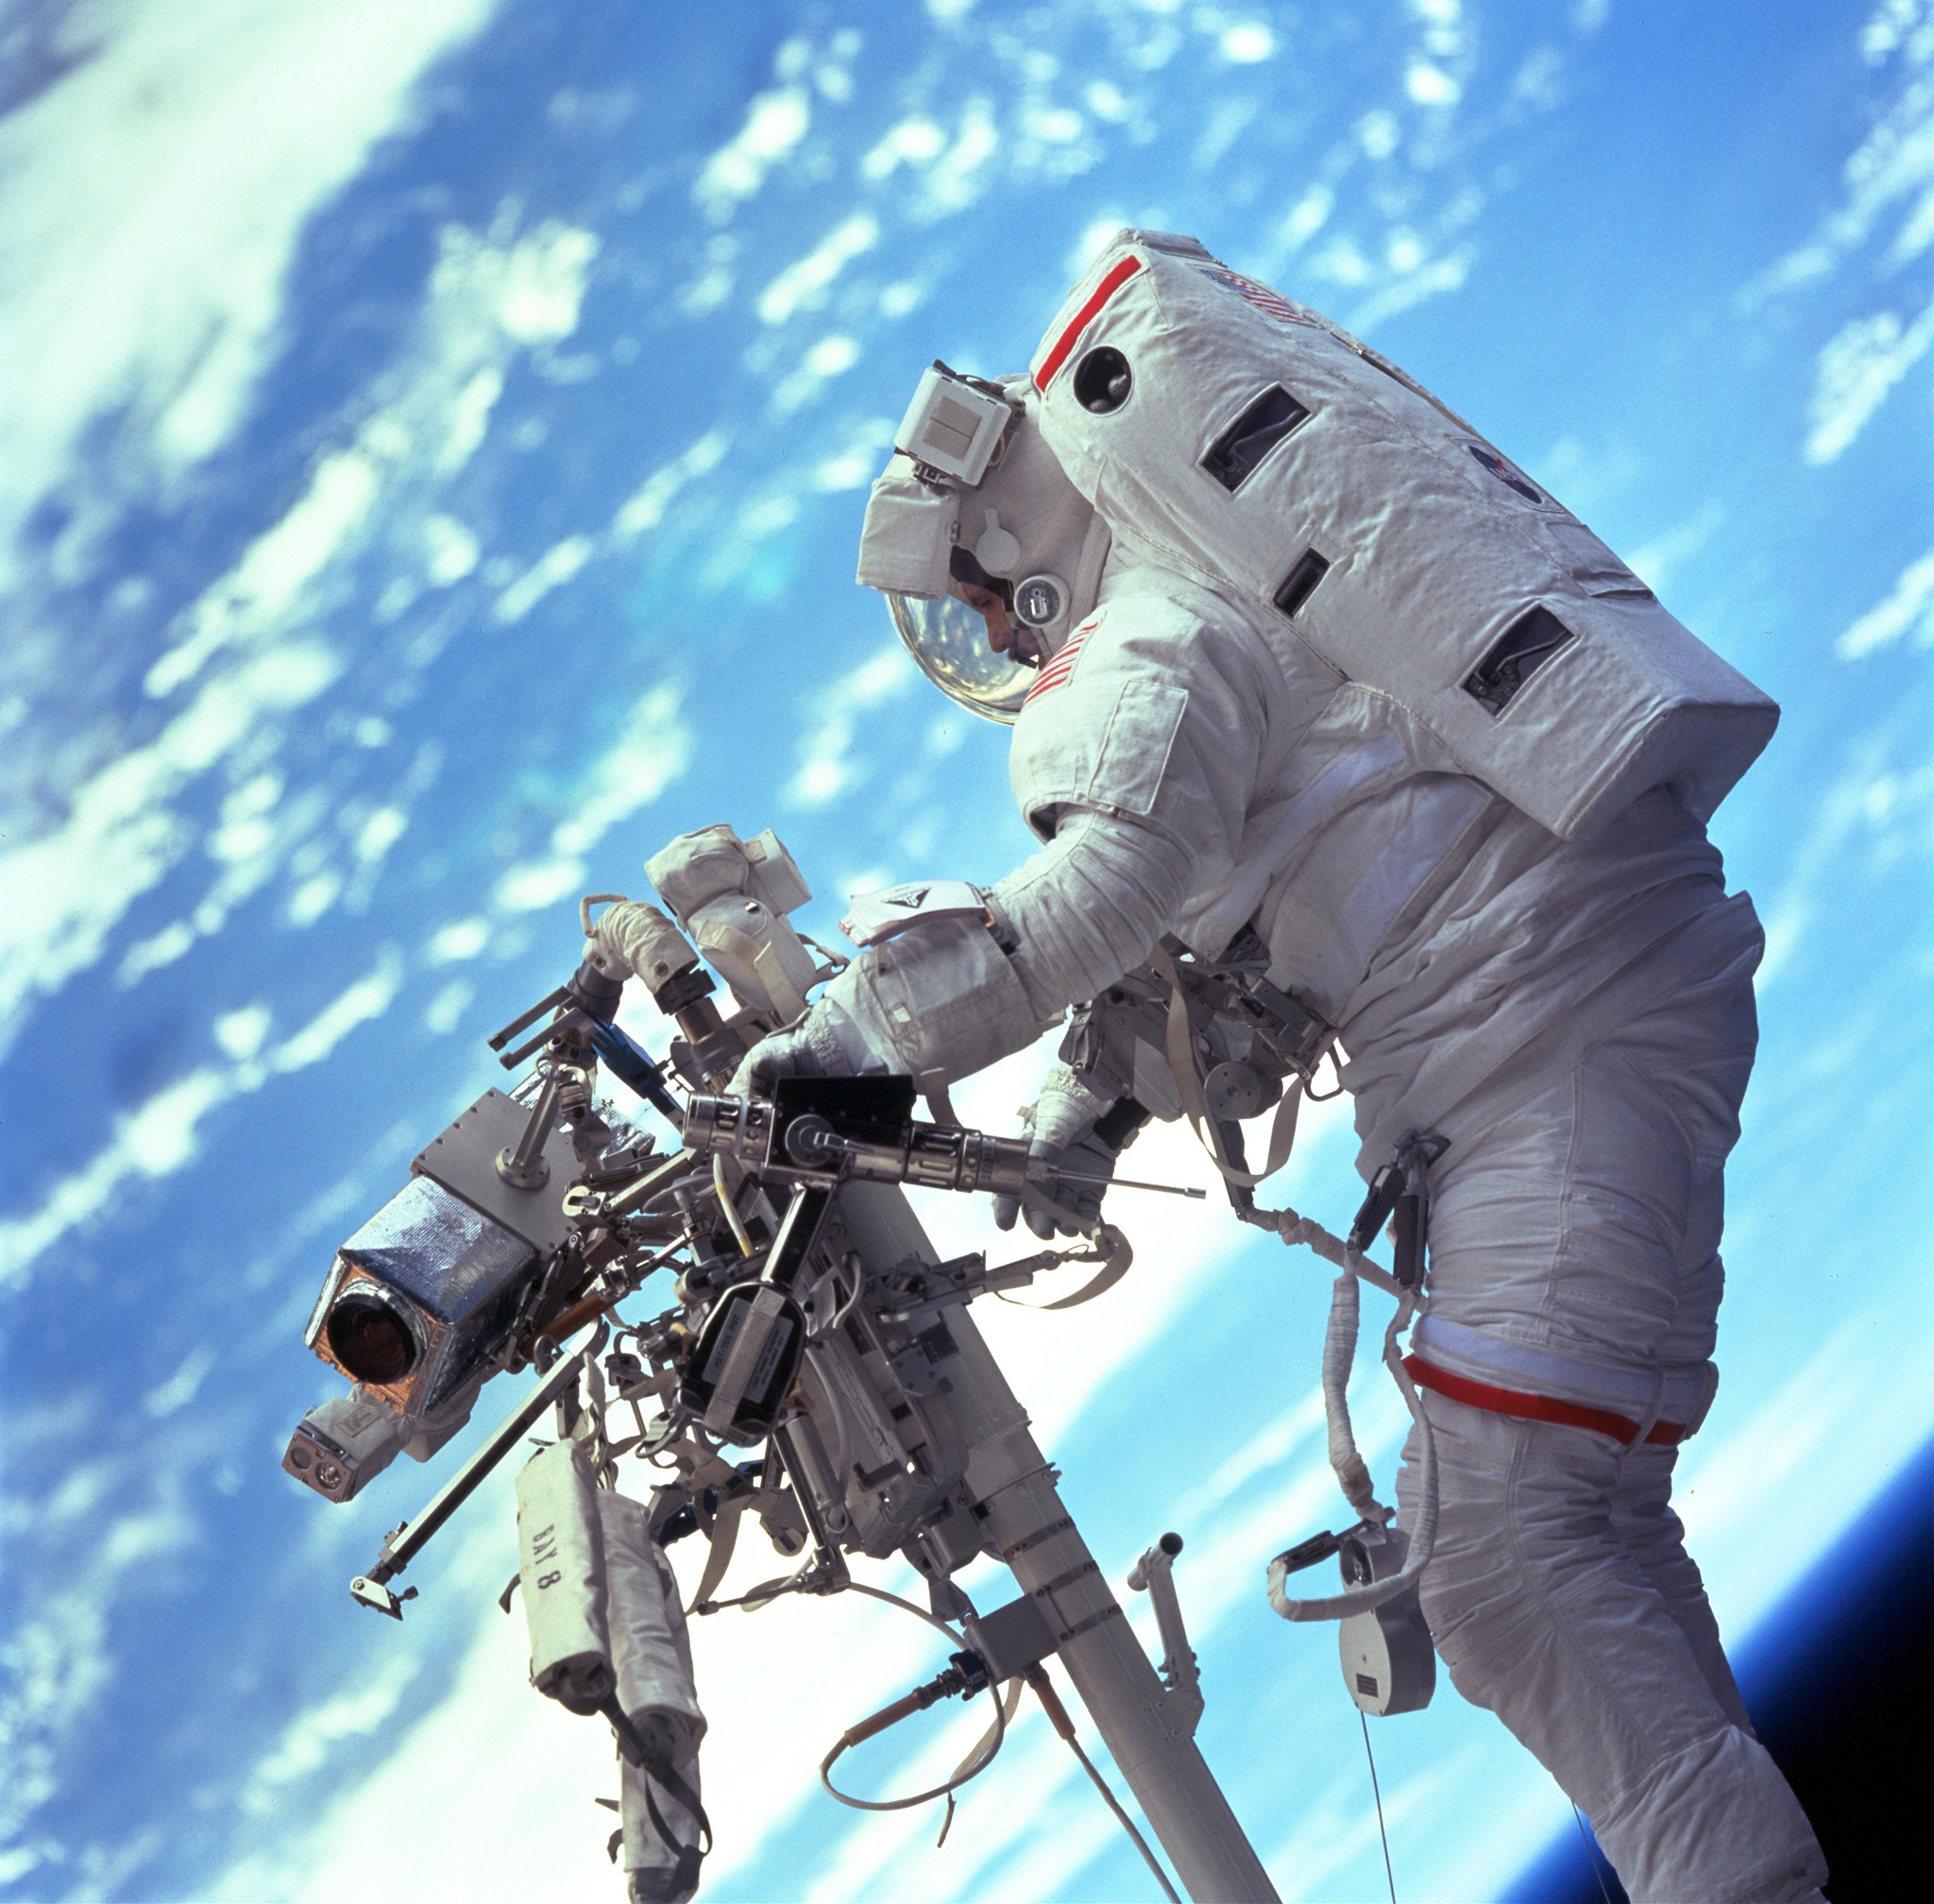 An astronaut on the end of the robotic arm with numerous tools. The blue earth is in the background